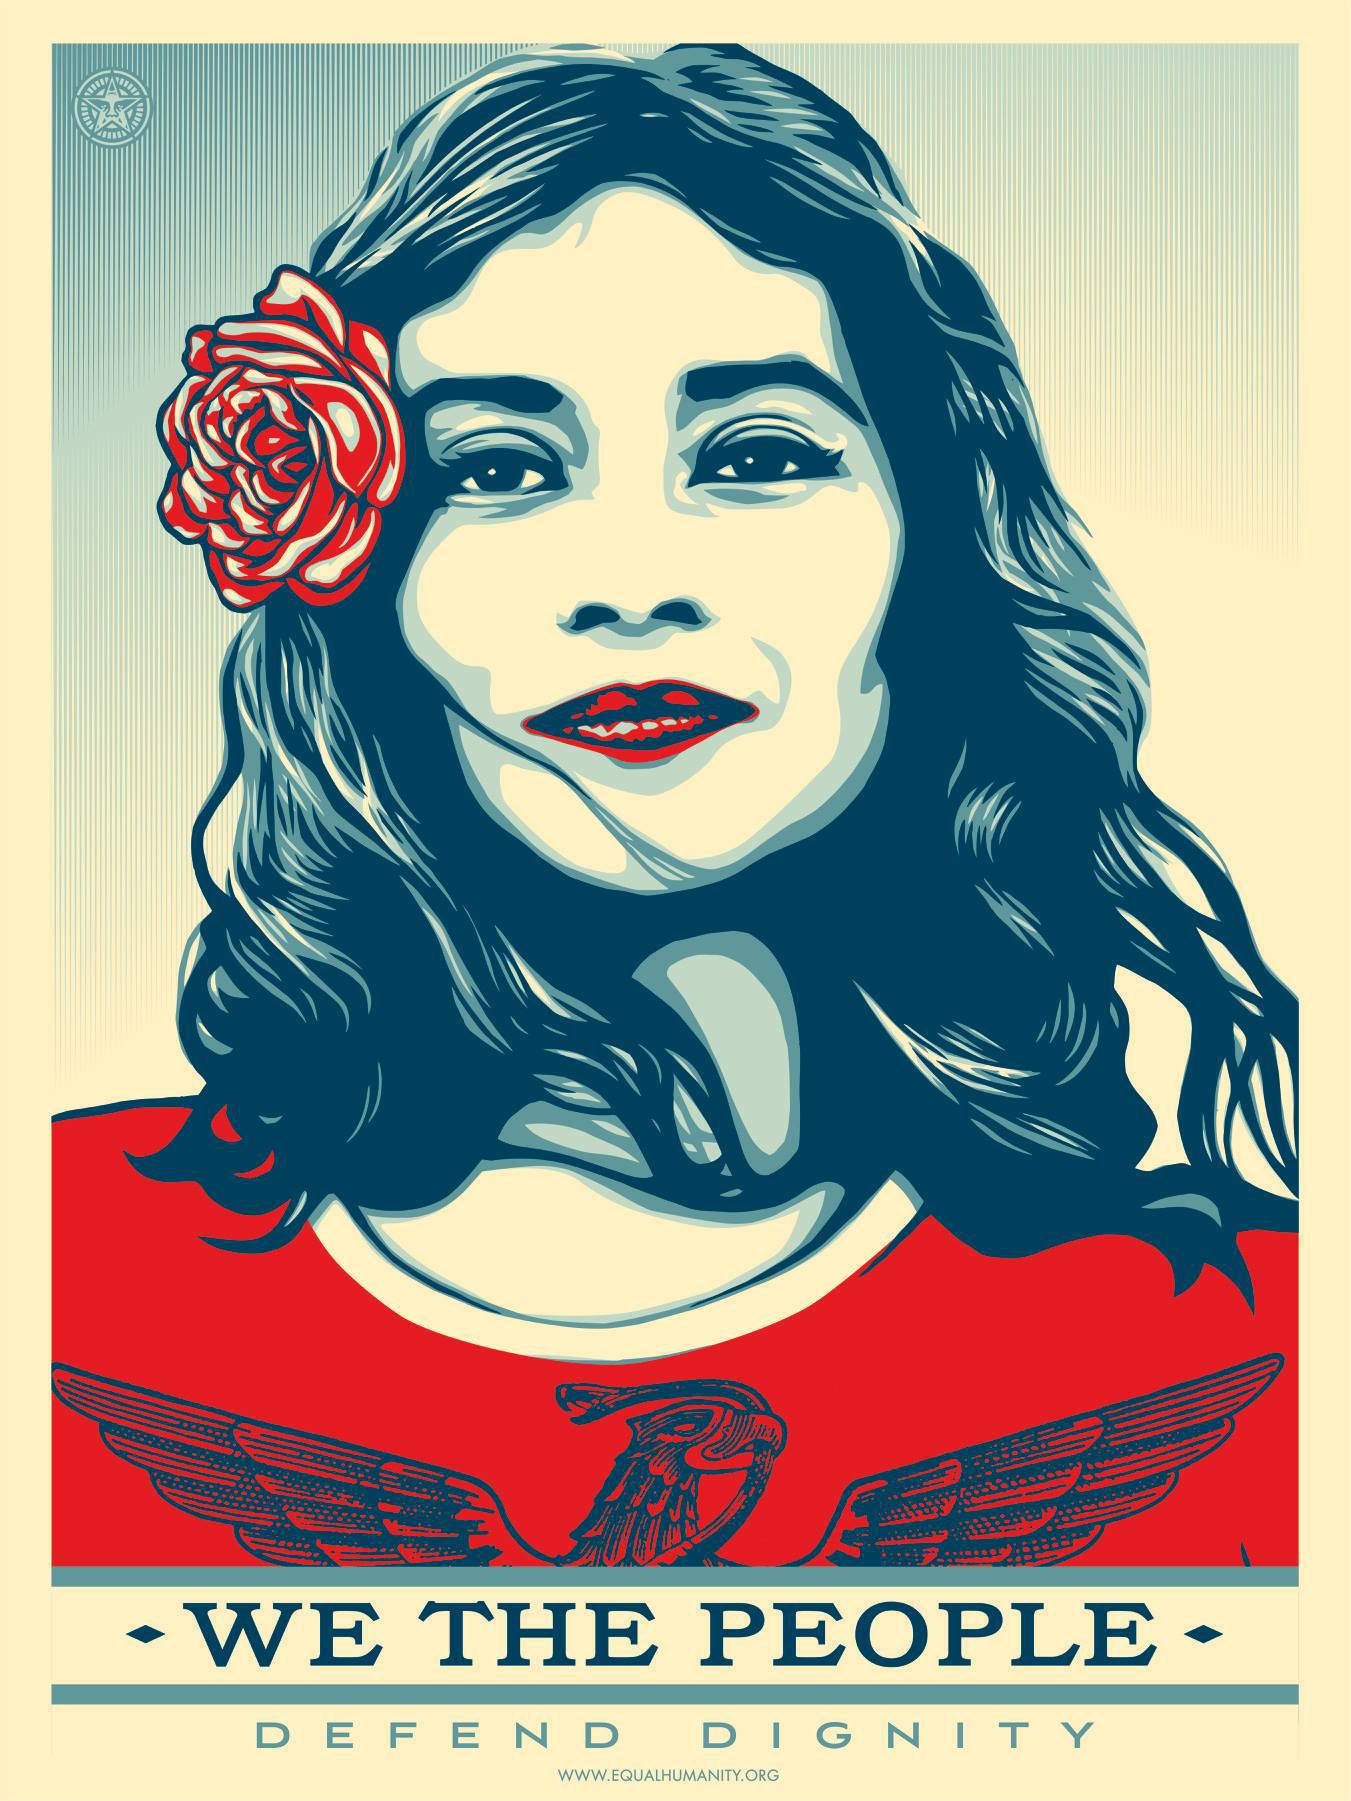 This listing is for the highly coveted Shepard Fairey "Defend Dignity", "Greater than Fear" and "Protect Each Other" set lithographs from the We The People series by the Amplifier Foundation.  These lithographs are SIGNED but UNNUMBERED  Prints are stored flat in very good condition. Following purchase, prints are rolled in archival paper and shipped with bubble wrap in sturdy cardboard tubes.